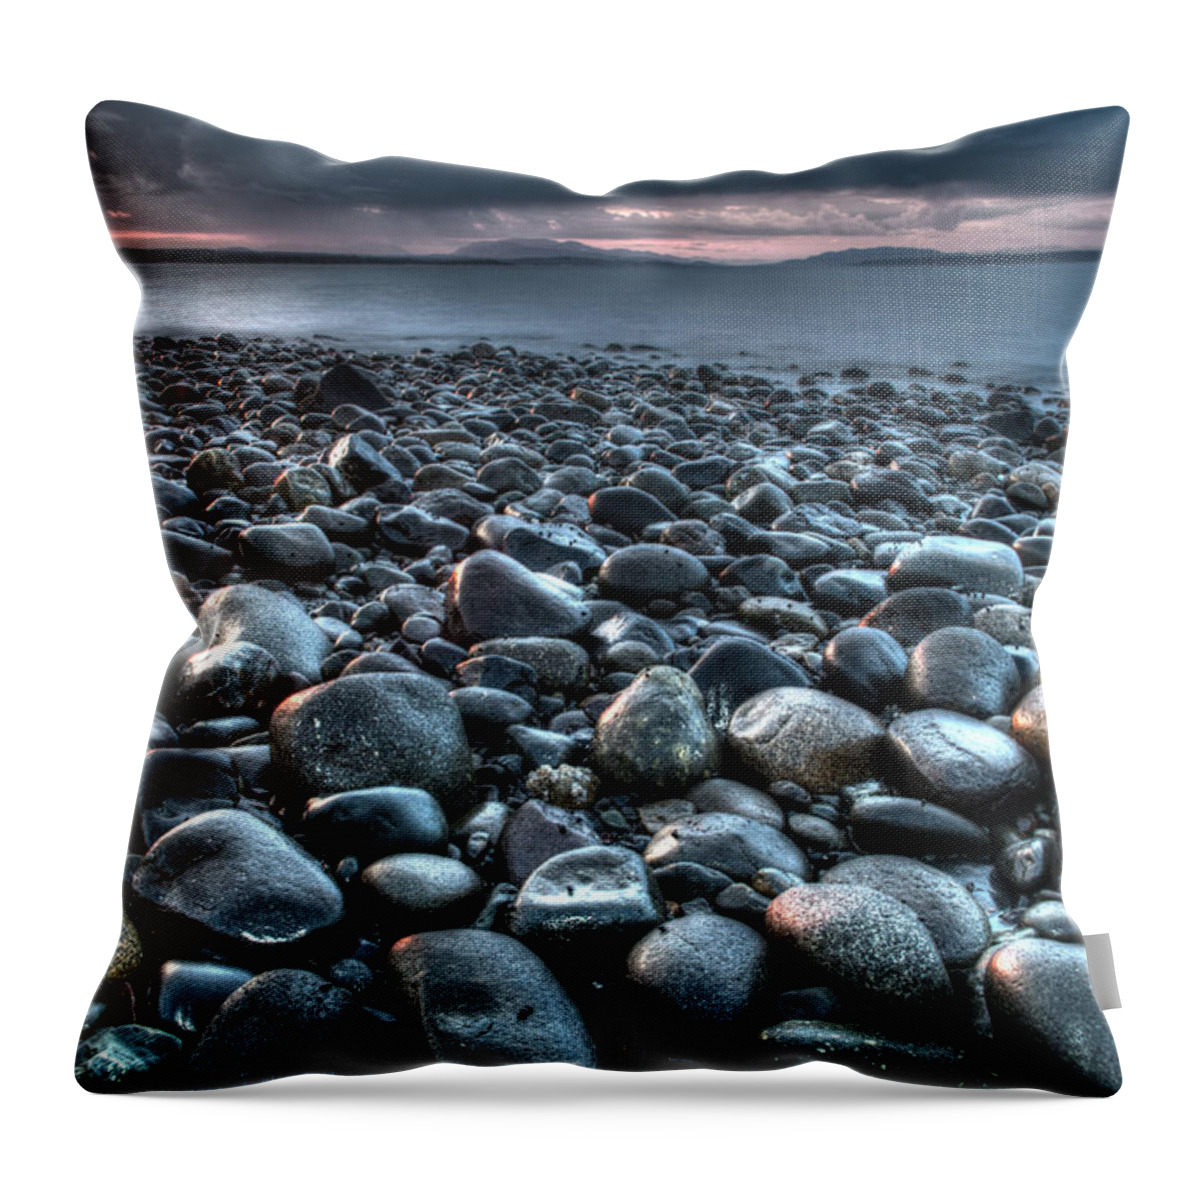 Sunset Throw Pillow featuring the photograph This Sunset Rocks by Kathy Paynter